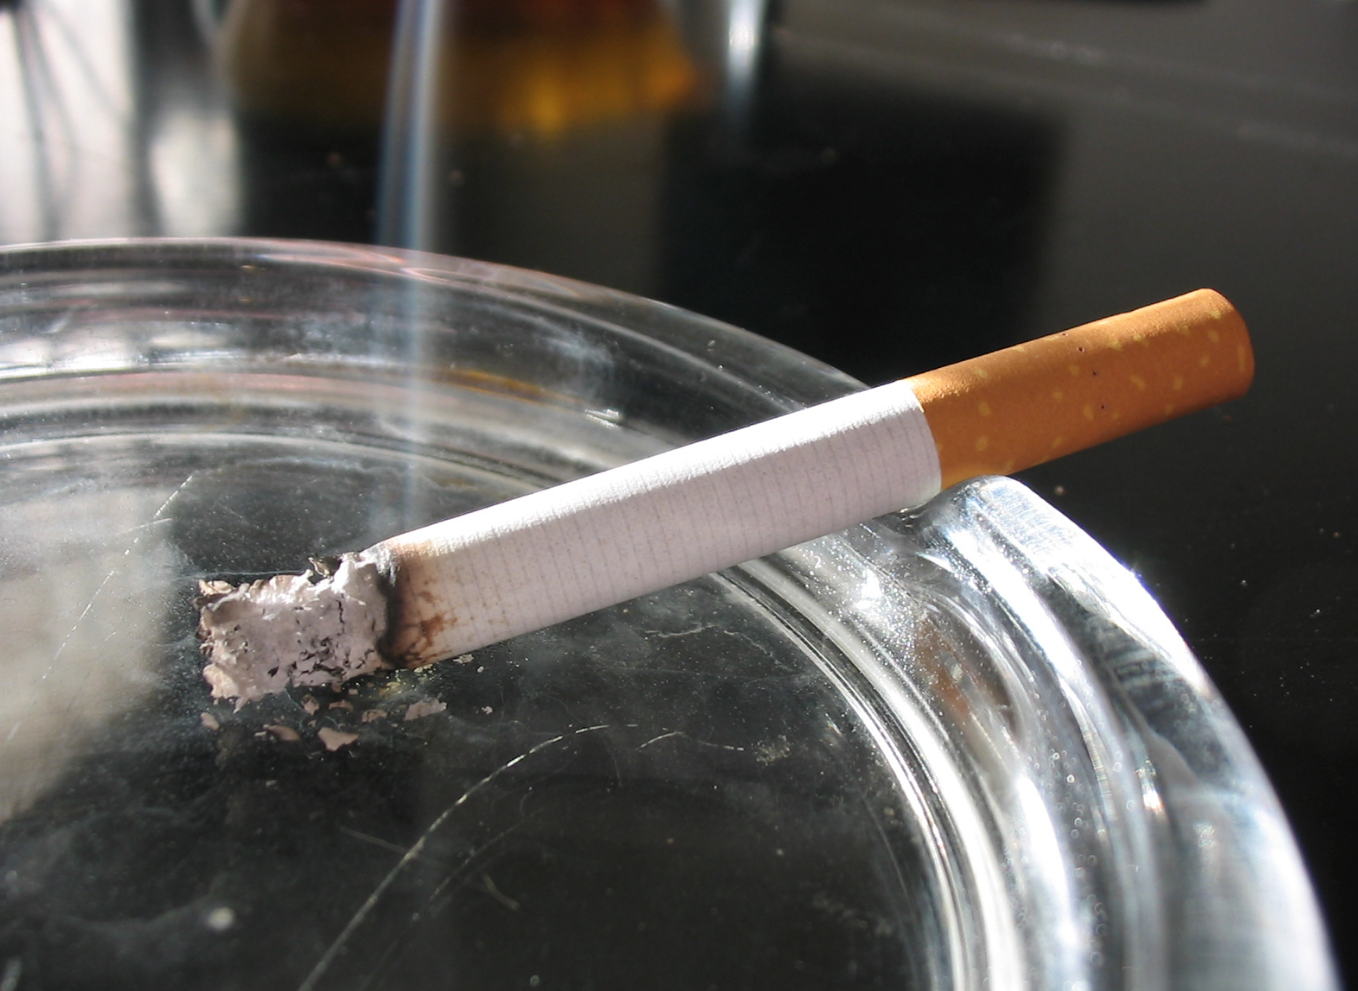 What would a scientific cigarette policy look like?